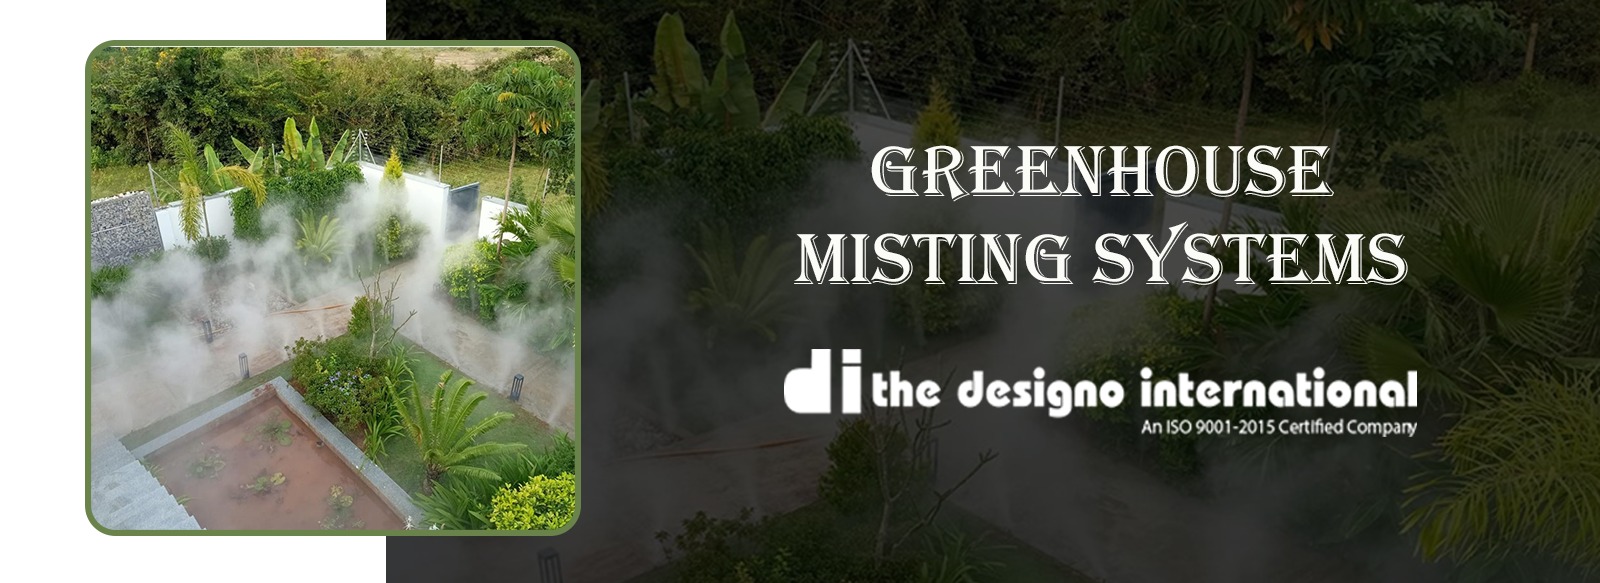 Introduction to the Magic of Mist: Greenhouse Misting Systems by The Designo International